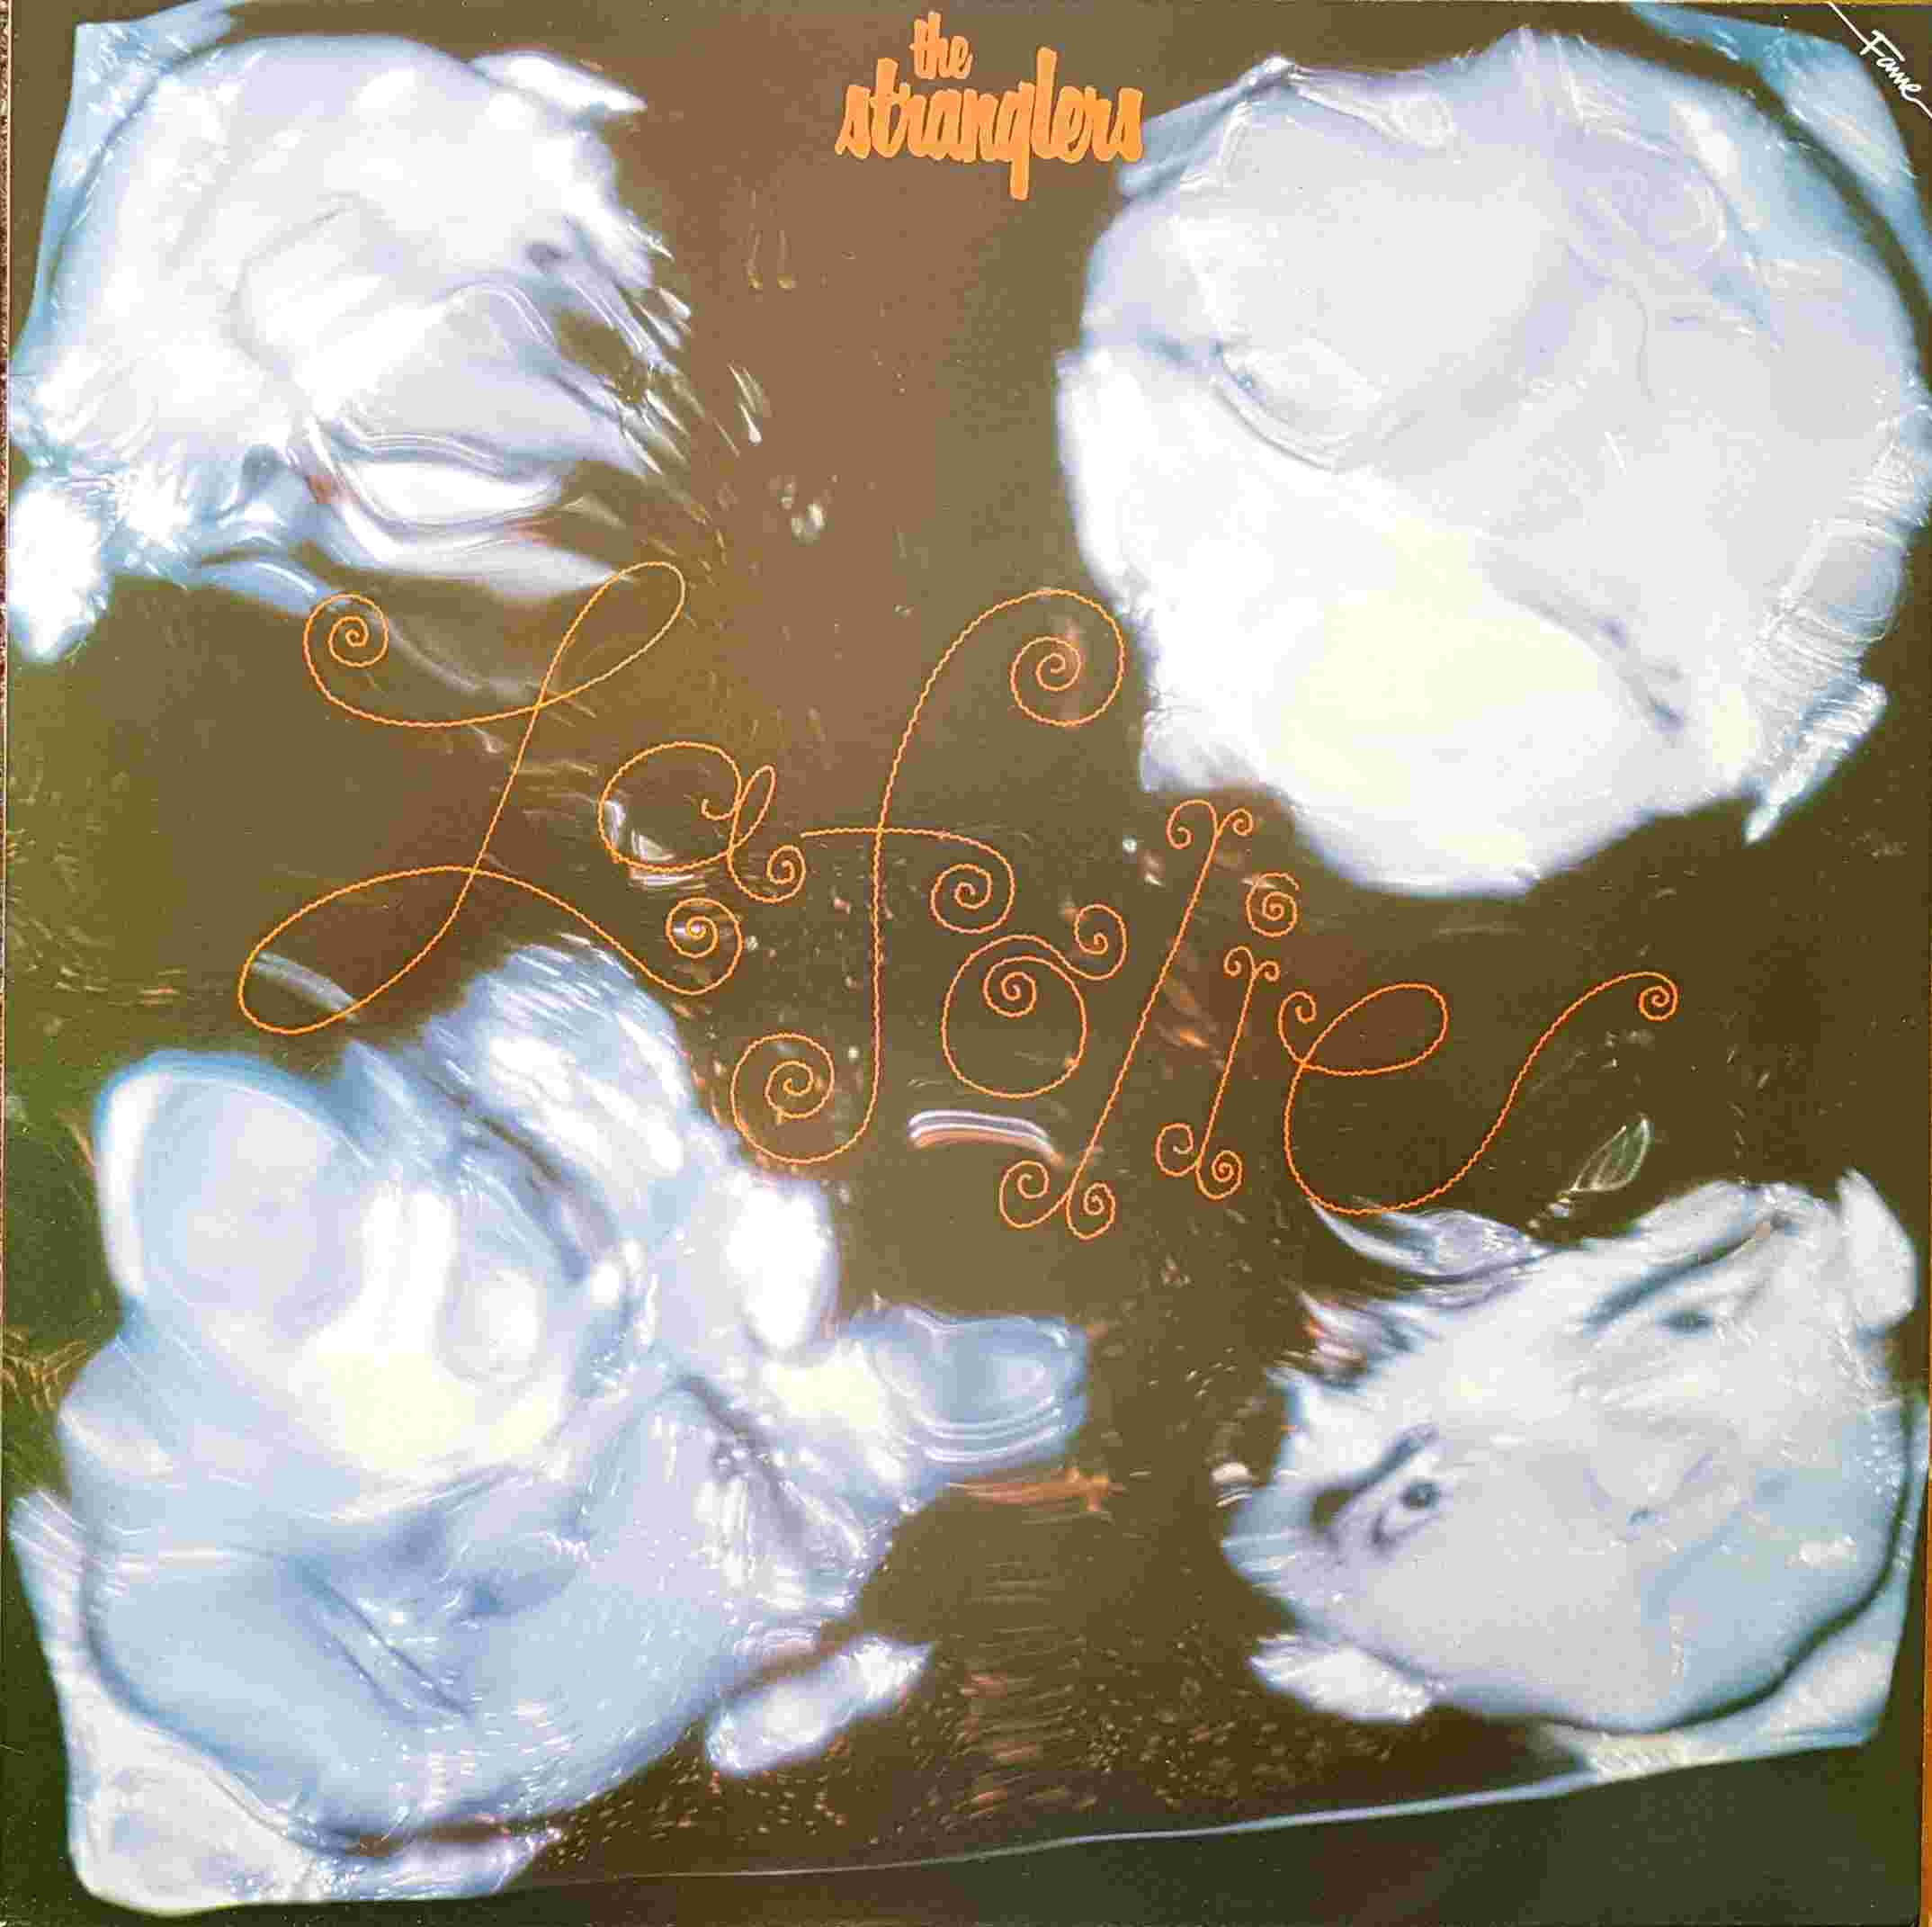 Picture of FA 4130831 La folie by artist The Stranglers  from The Stranglers